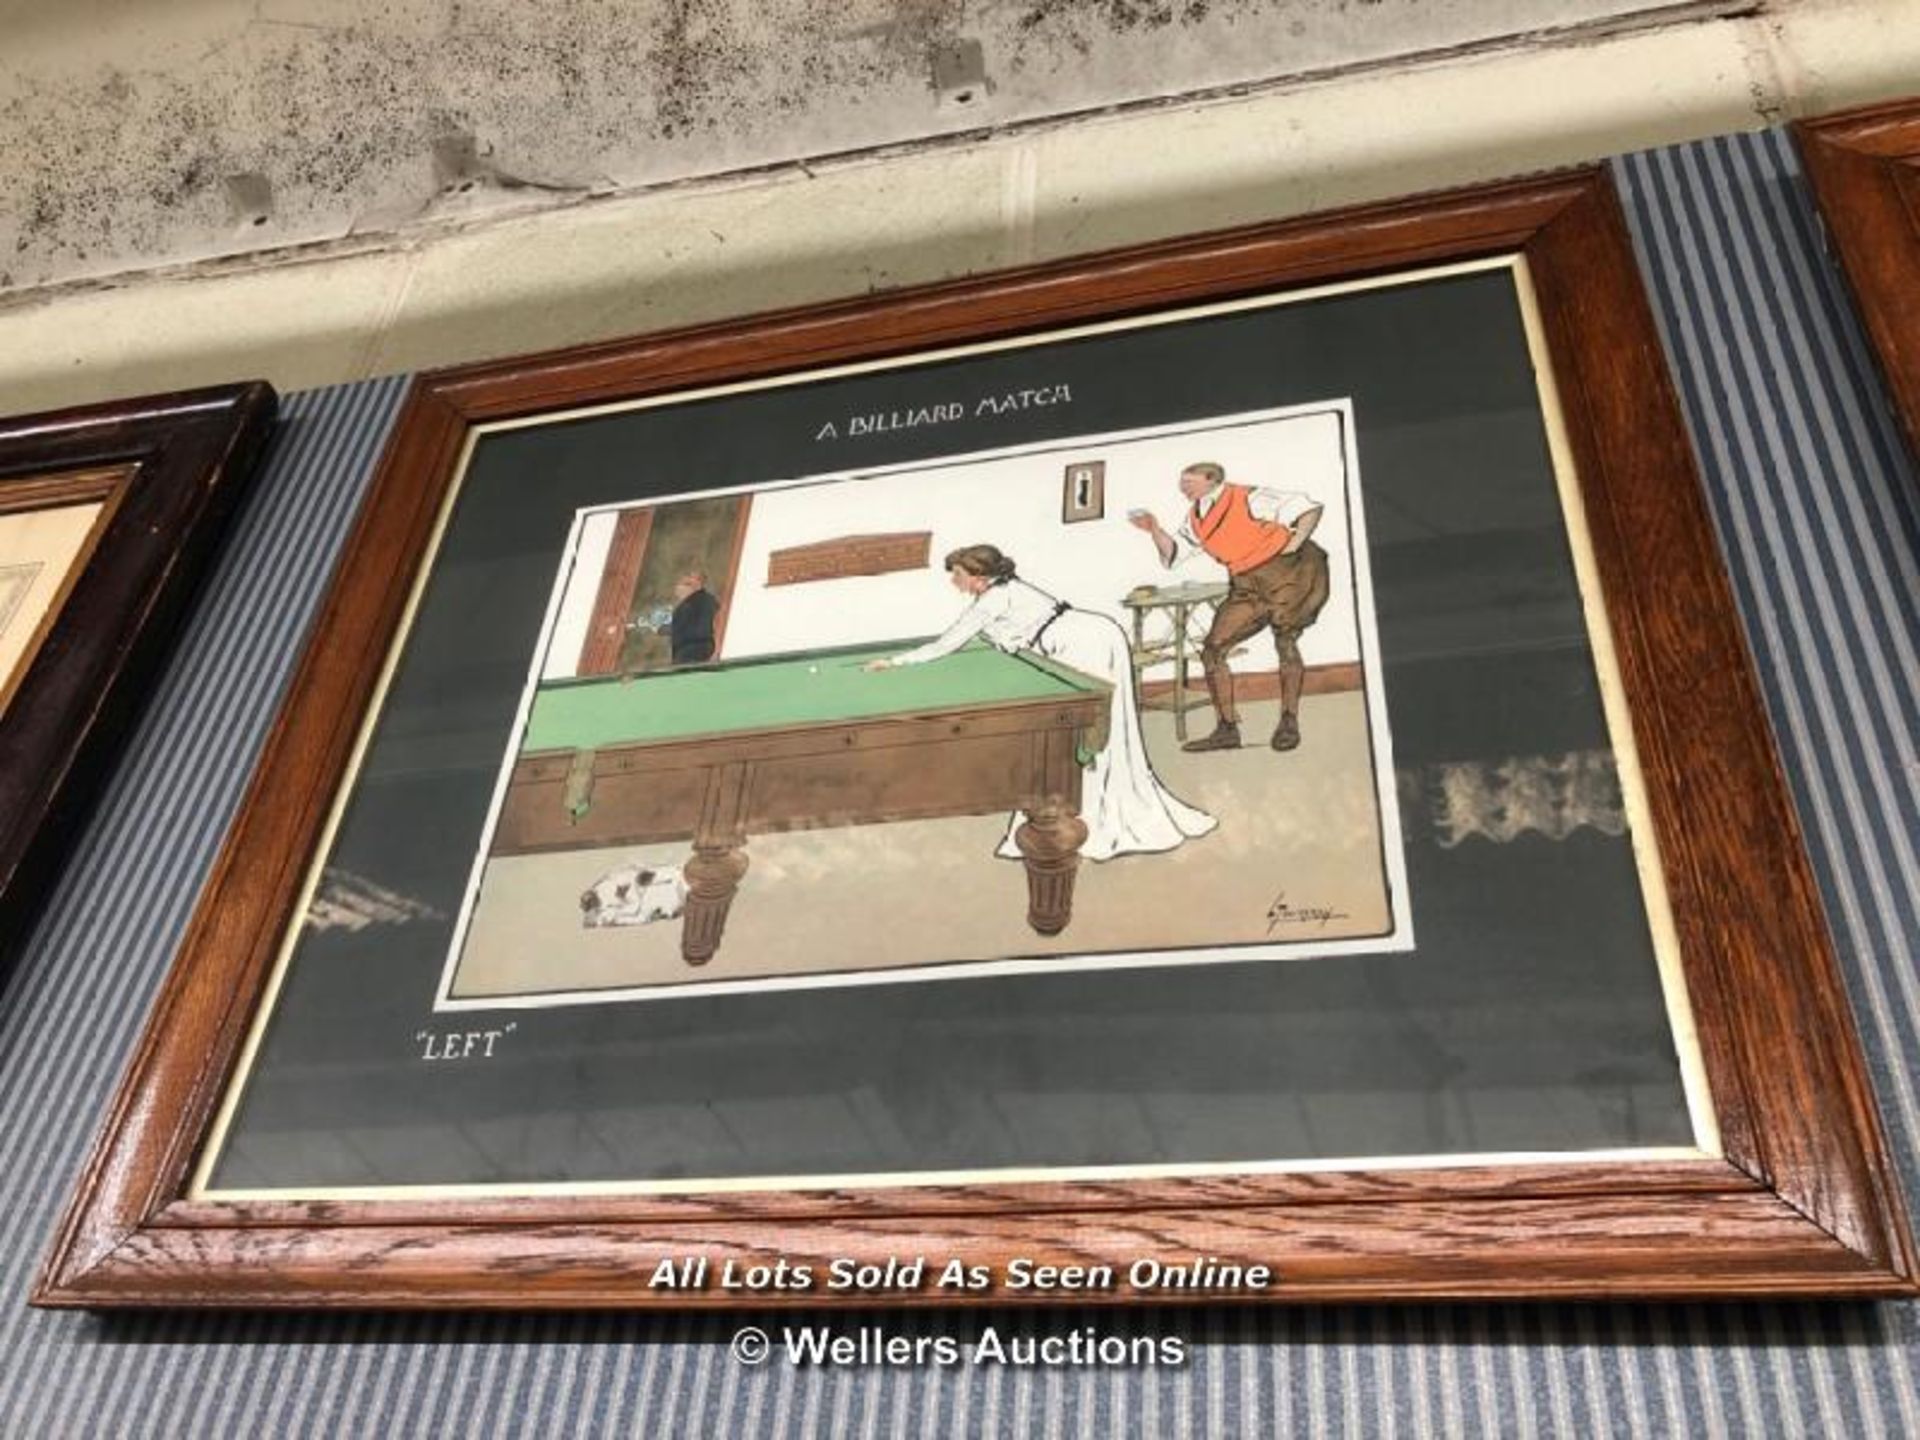 X4 BILLIARD THEMED FRAMED ARTWORK 'A BILLIARD MATCH' INC. "LEFT", "KISSING", "SNOOKERED" AND "THE - Image 4 of 5